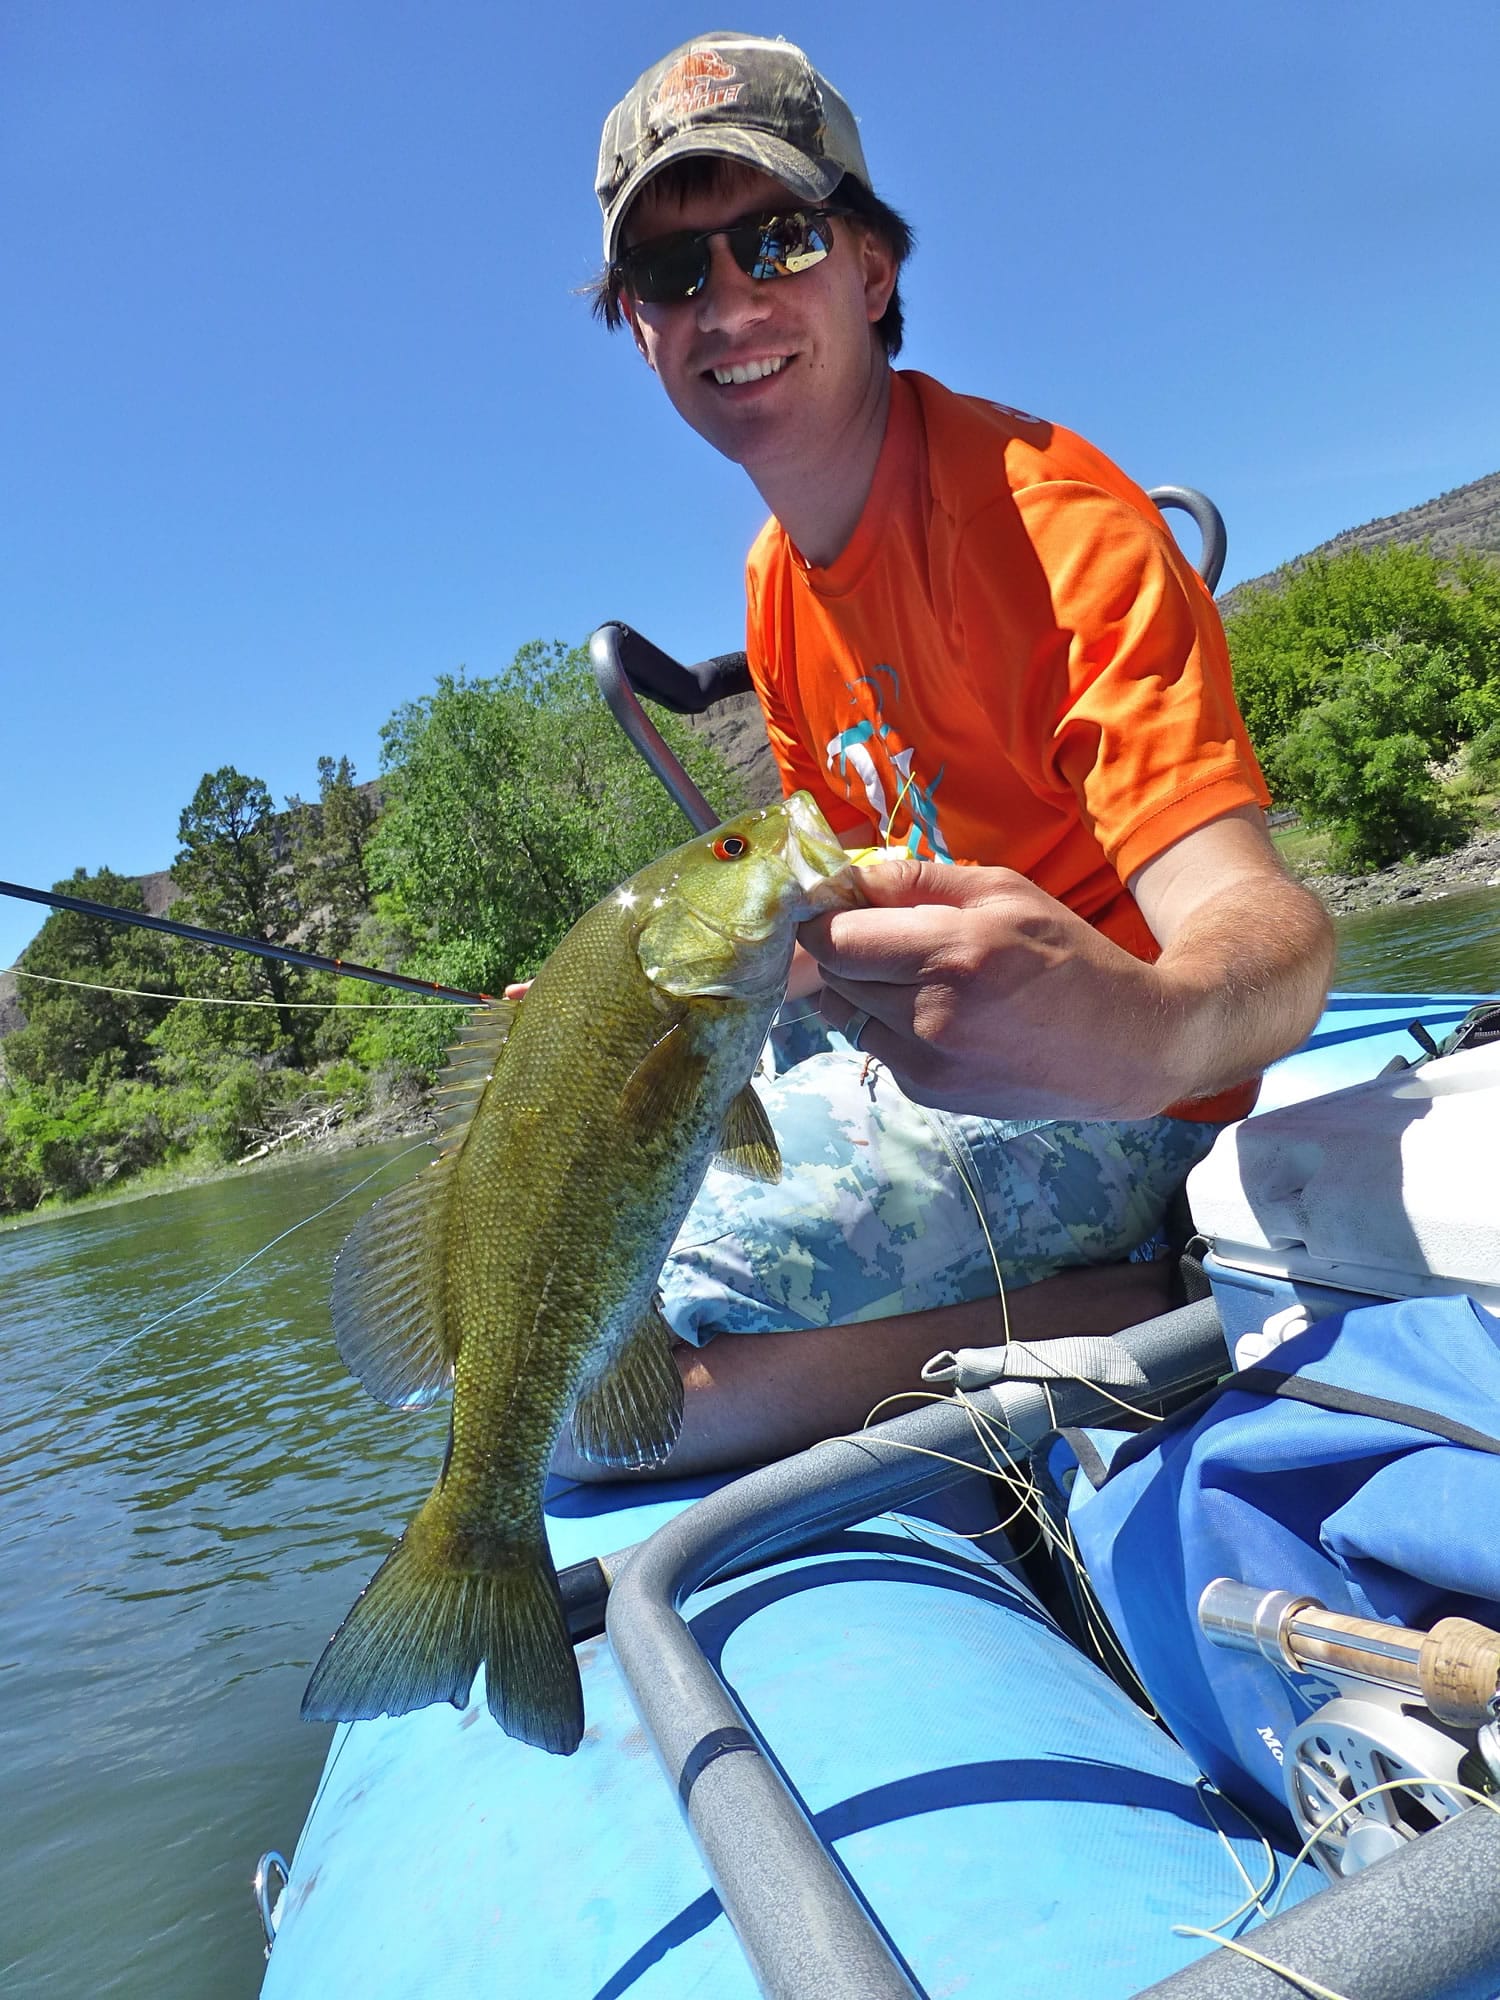 Darren Strong of Boise, Idaho, lands a smallmouth bass June 8 while floating on the John Day River near Fossil, Ore.